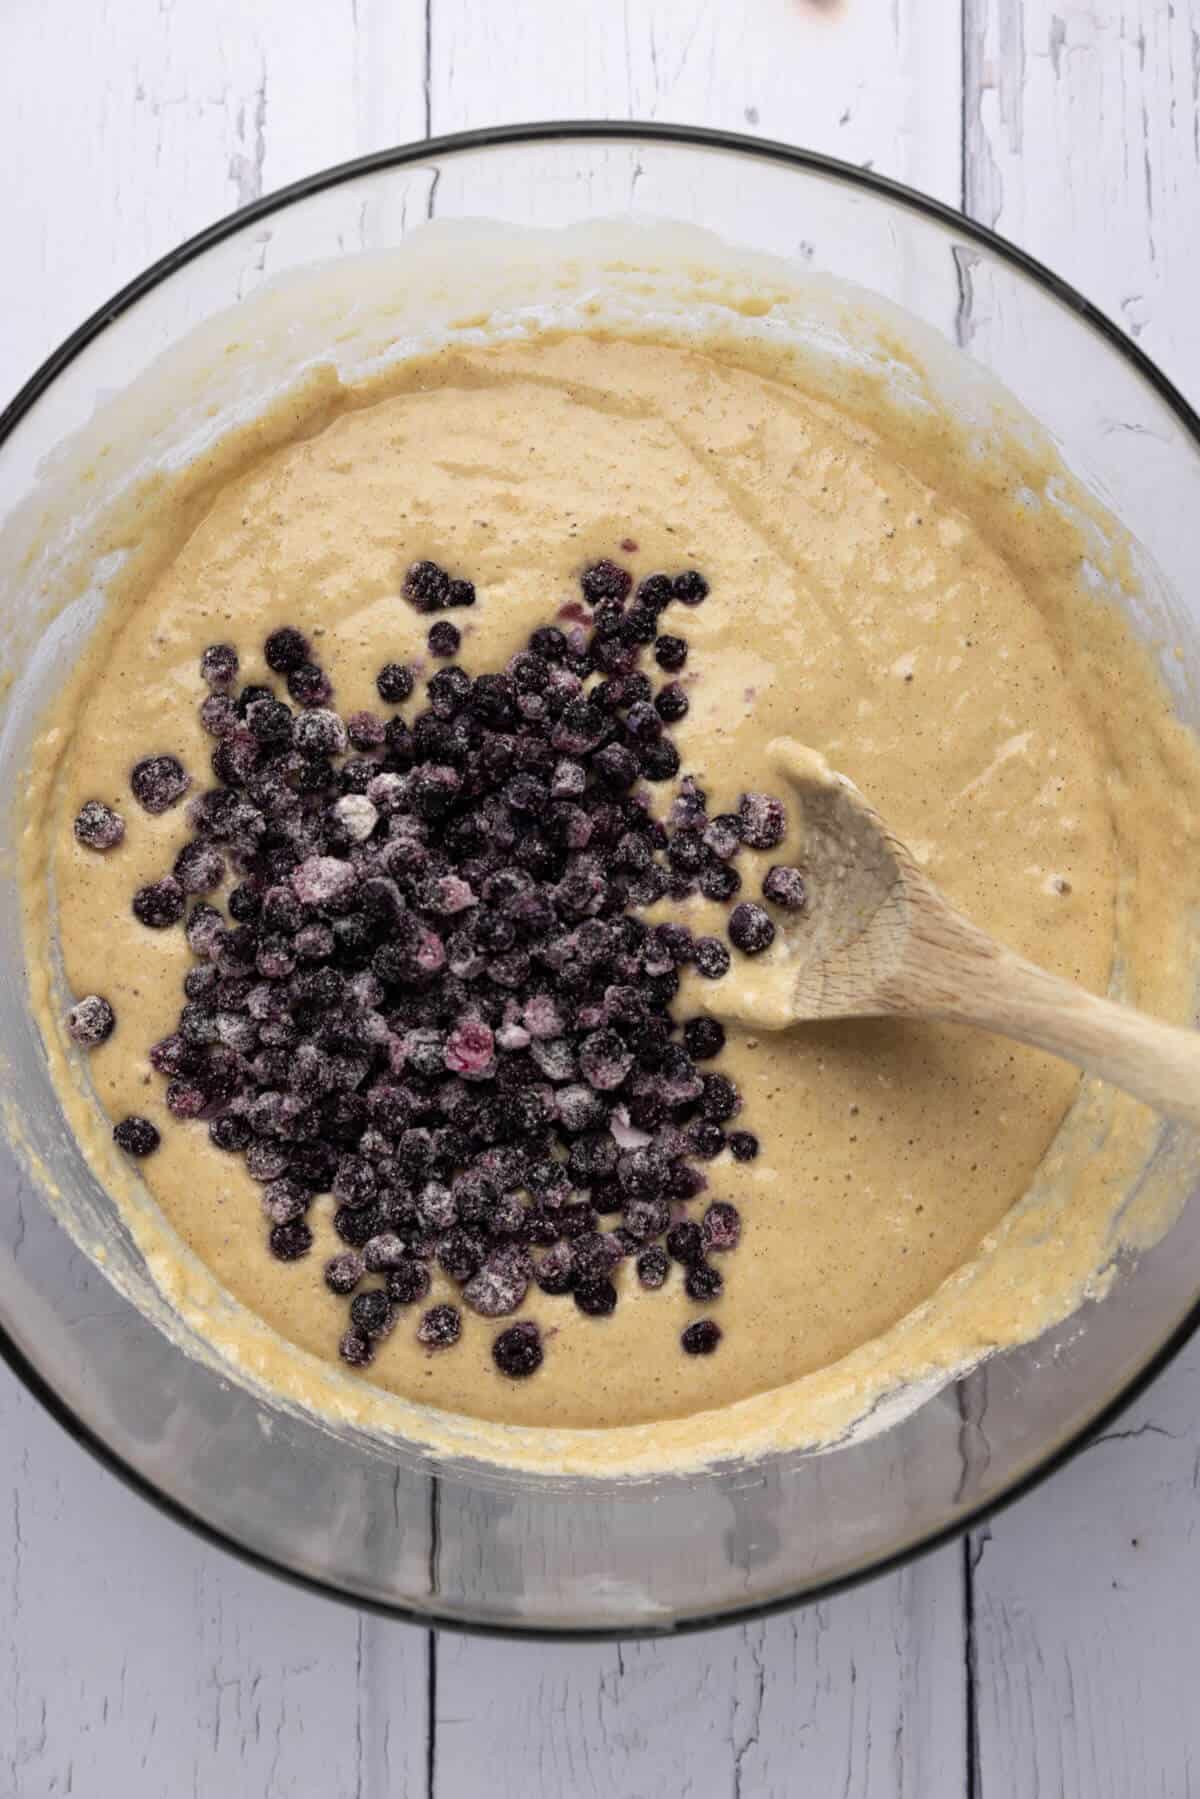 Blueberries added to the large mixing bowl of muffin batter.